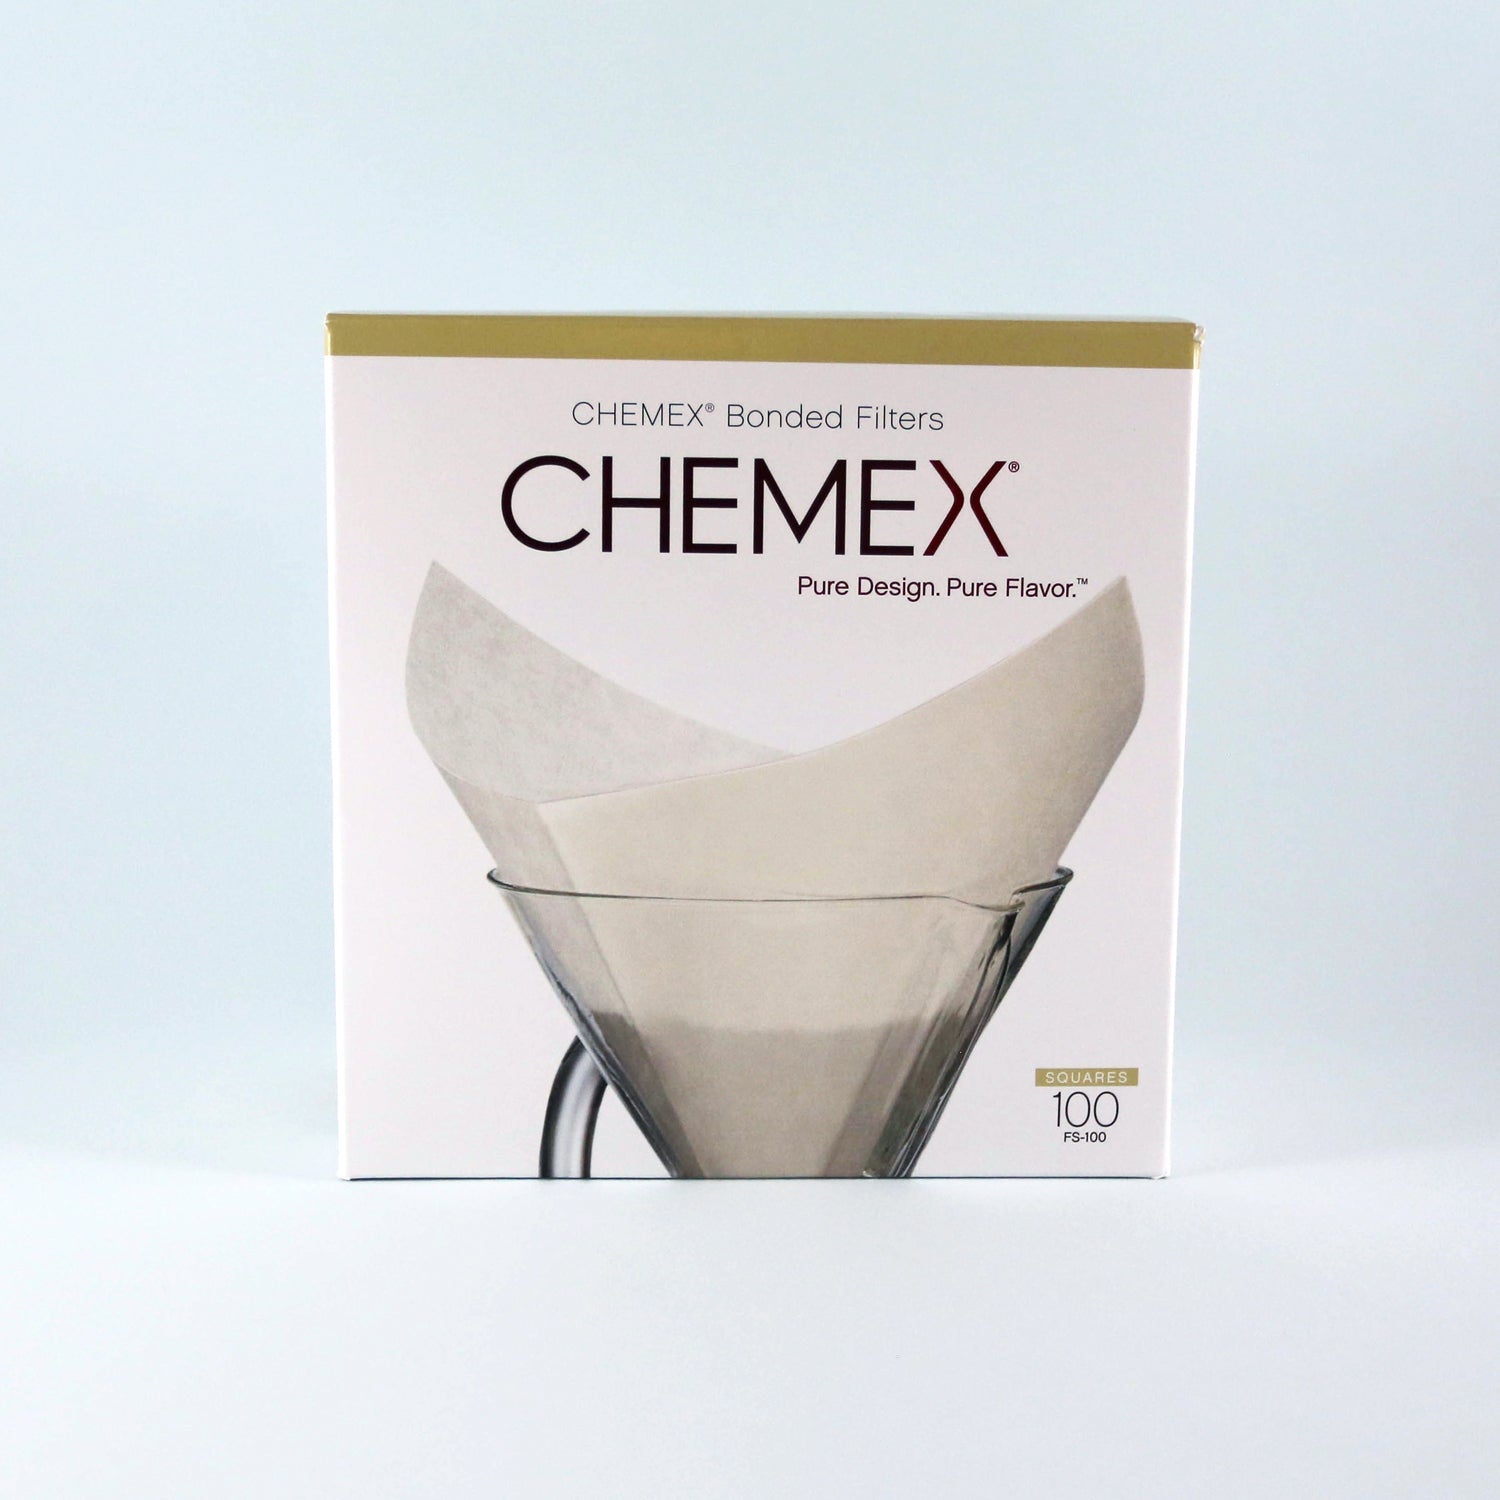 A box of Tandem Coffee Roasters Chemex Bonded Filters for coffee brewing, displayed against a plain light background. The box is tan and white, featuring an image of a Chemex coffee maker with a filter.